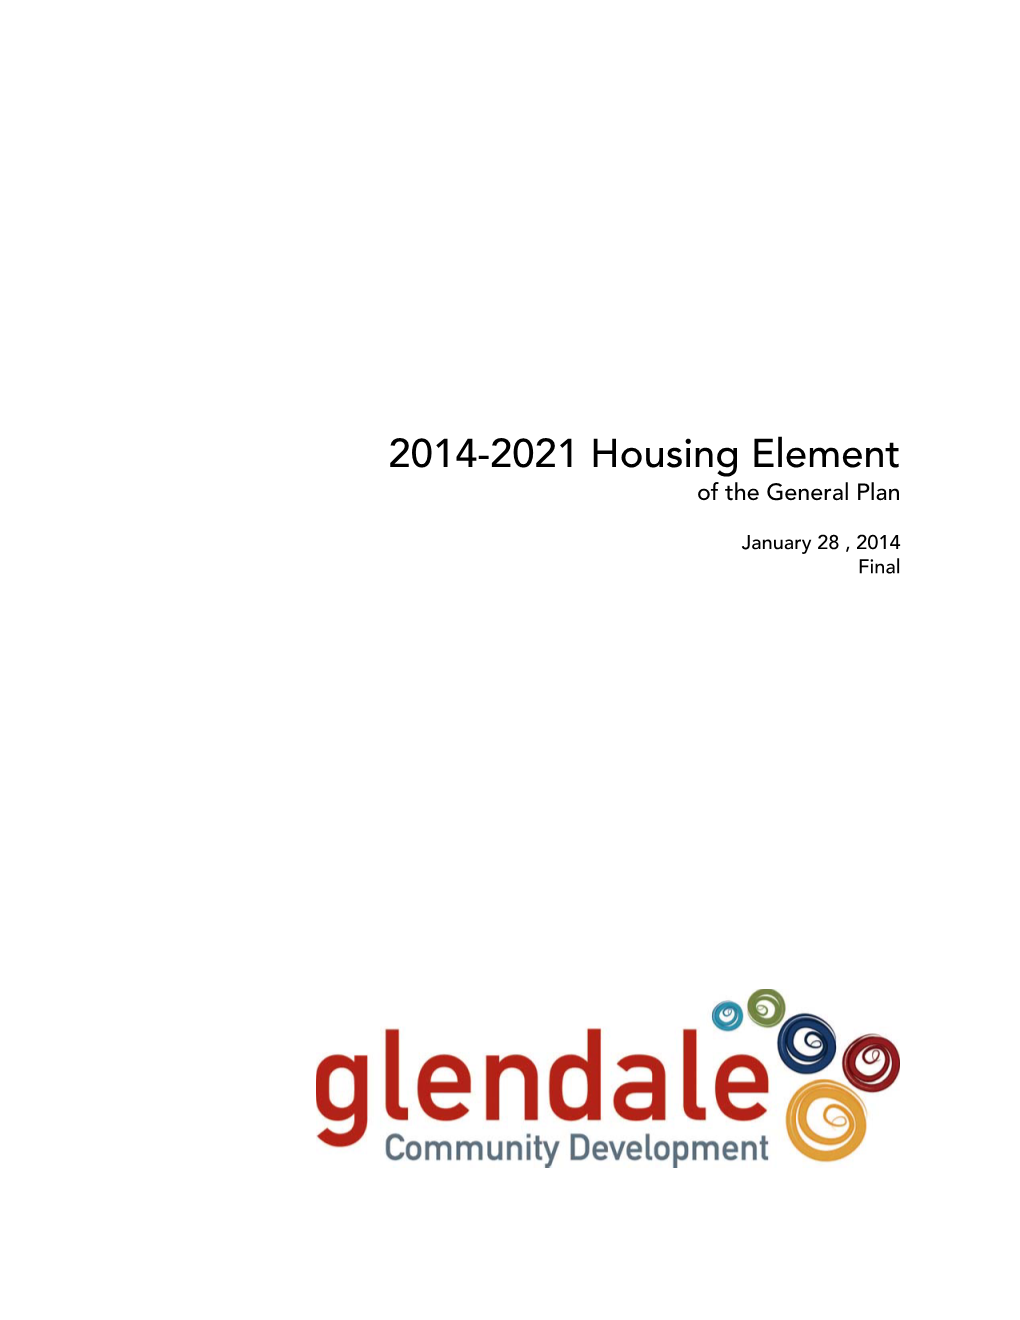 2014-2021 Housing Element of the General Plan